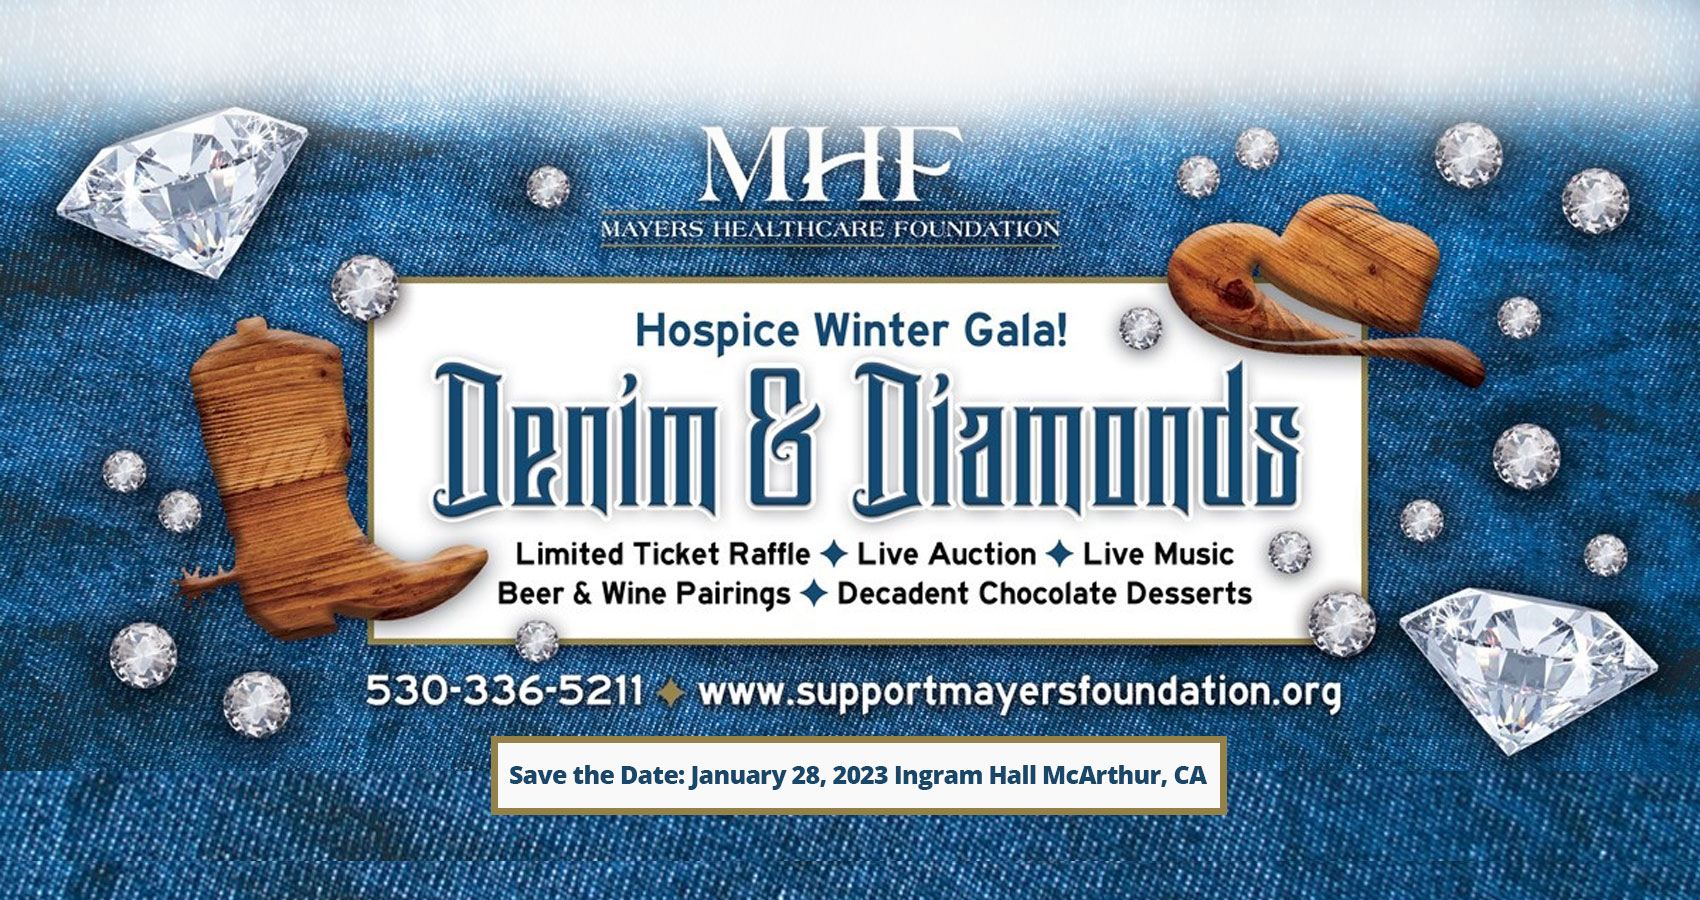 Banner Graphic of blue jean background with Diamonds scattered around and wooden shaped cowboy boot and wood shape cowboy hat. Banner says:

MHF
MAYERS HEALTHCARE FOUNDATION

Hospice Winter Gala!
Denim & Diamonds
*Limited Ticket Raffle 
* Live Auction
* Live Music
*Beer & Wine Pairings
*Decadent Chocolate Desserts

530-336-5211
wwww.supportmayersfoundation.org
Save the Date: January 28, 2023
Ingram Hall McArthur, CA